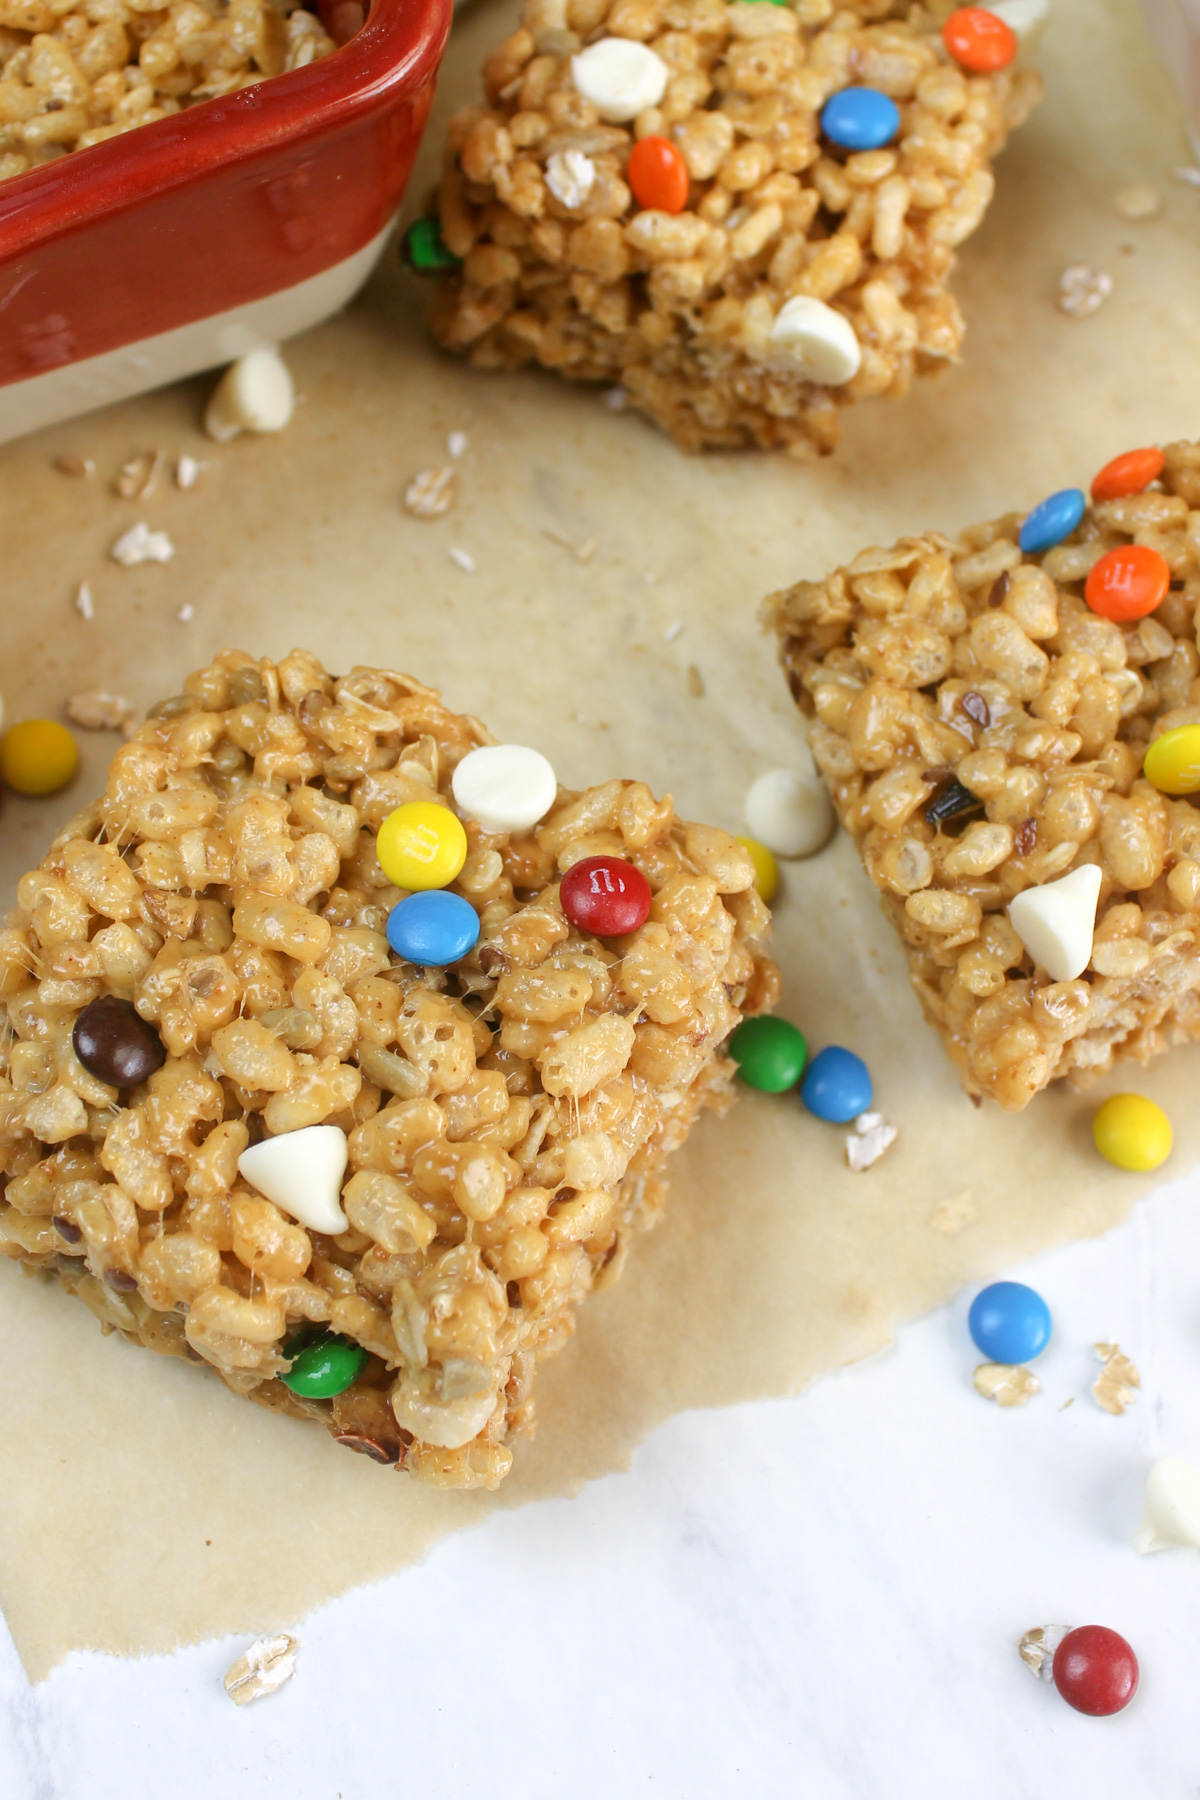 Rice Krispies treats with M&M's and chocolate chips.